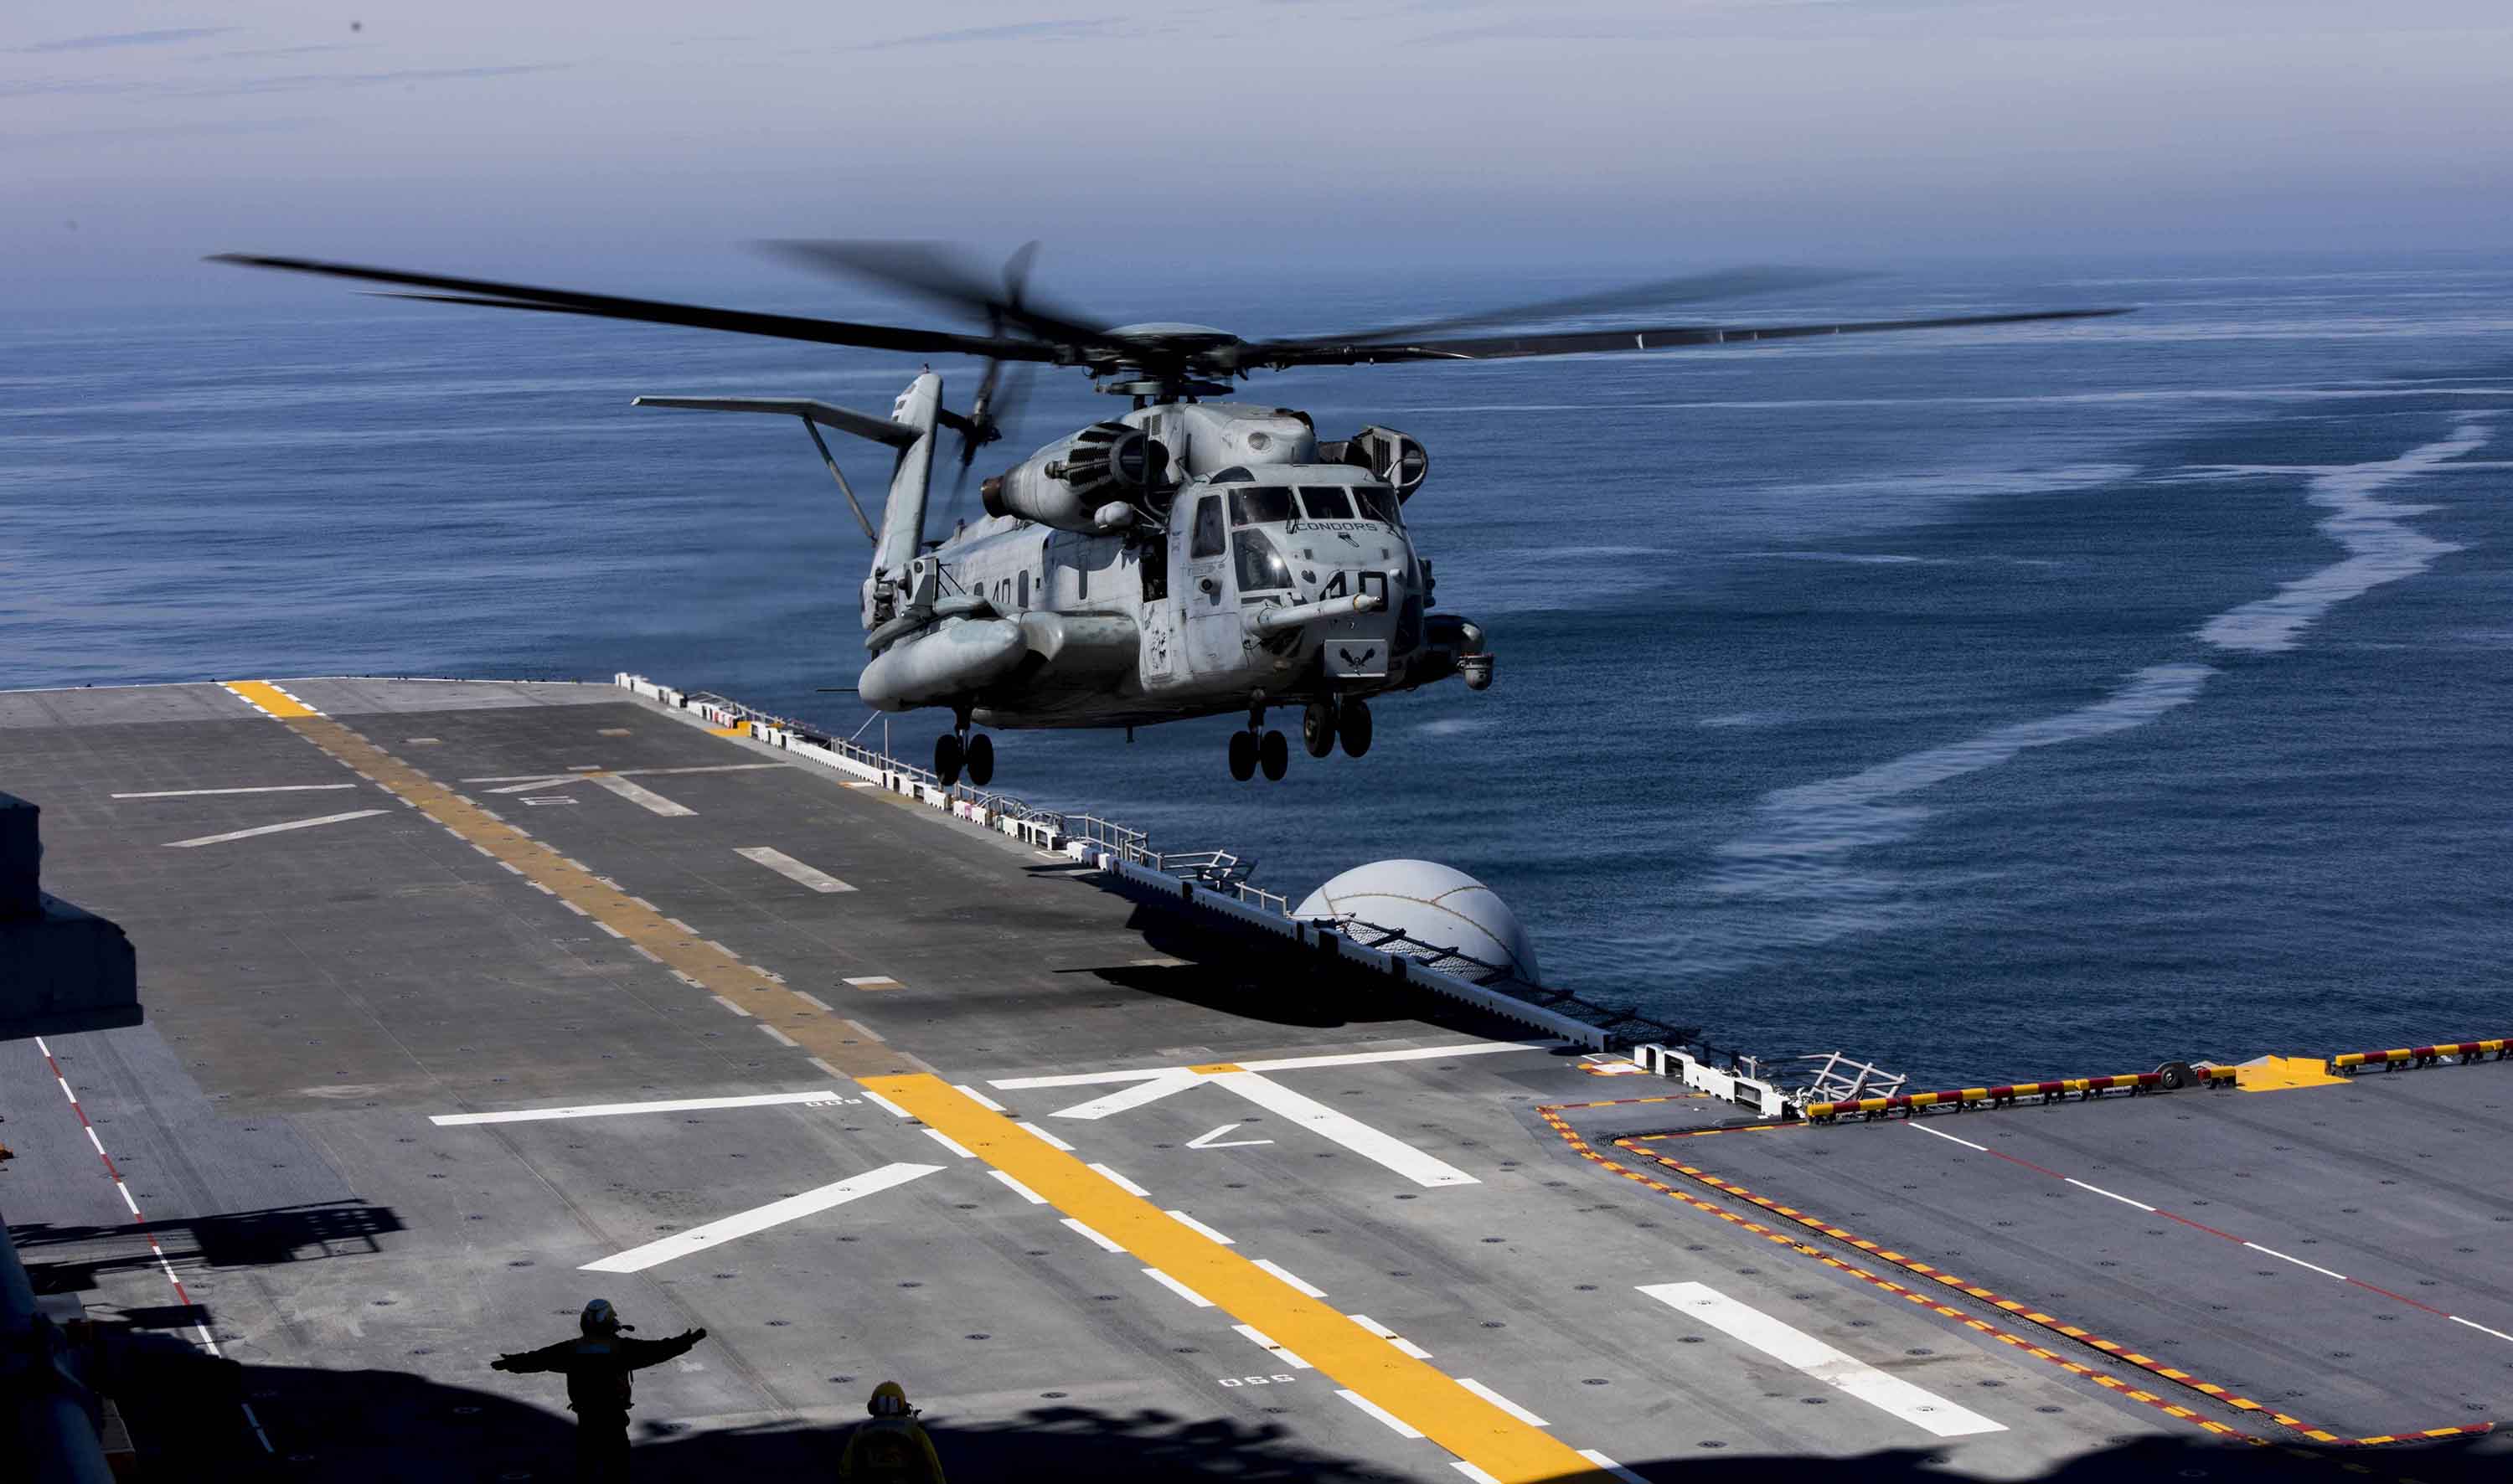 Search in the Storm: The Intense Hunt for the Missing Marines and Their CH-53E Super Stallion